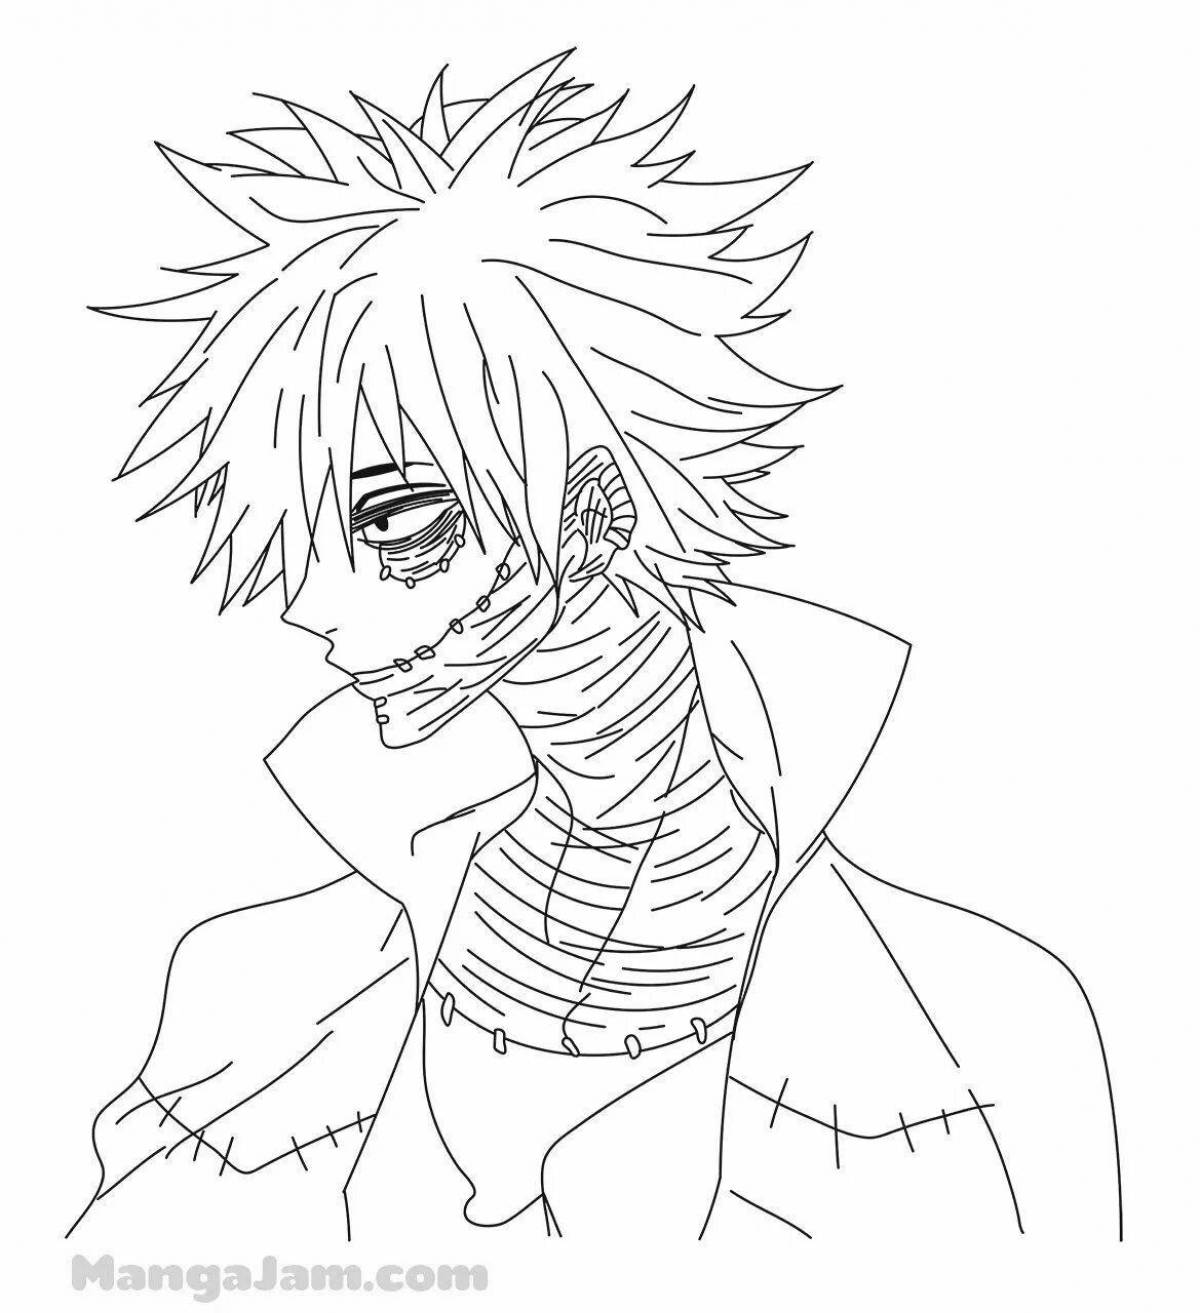 Colorful dabi coloring page